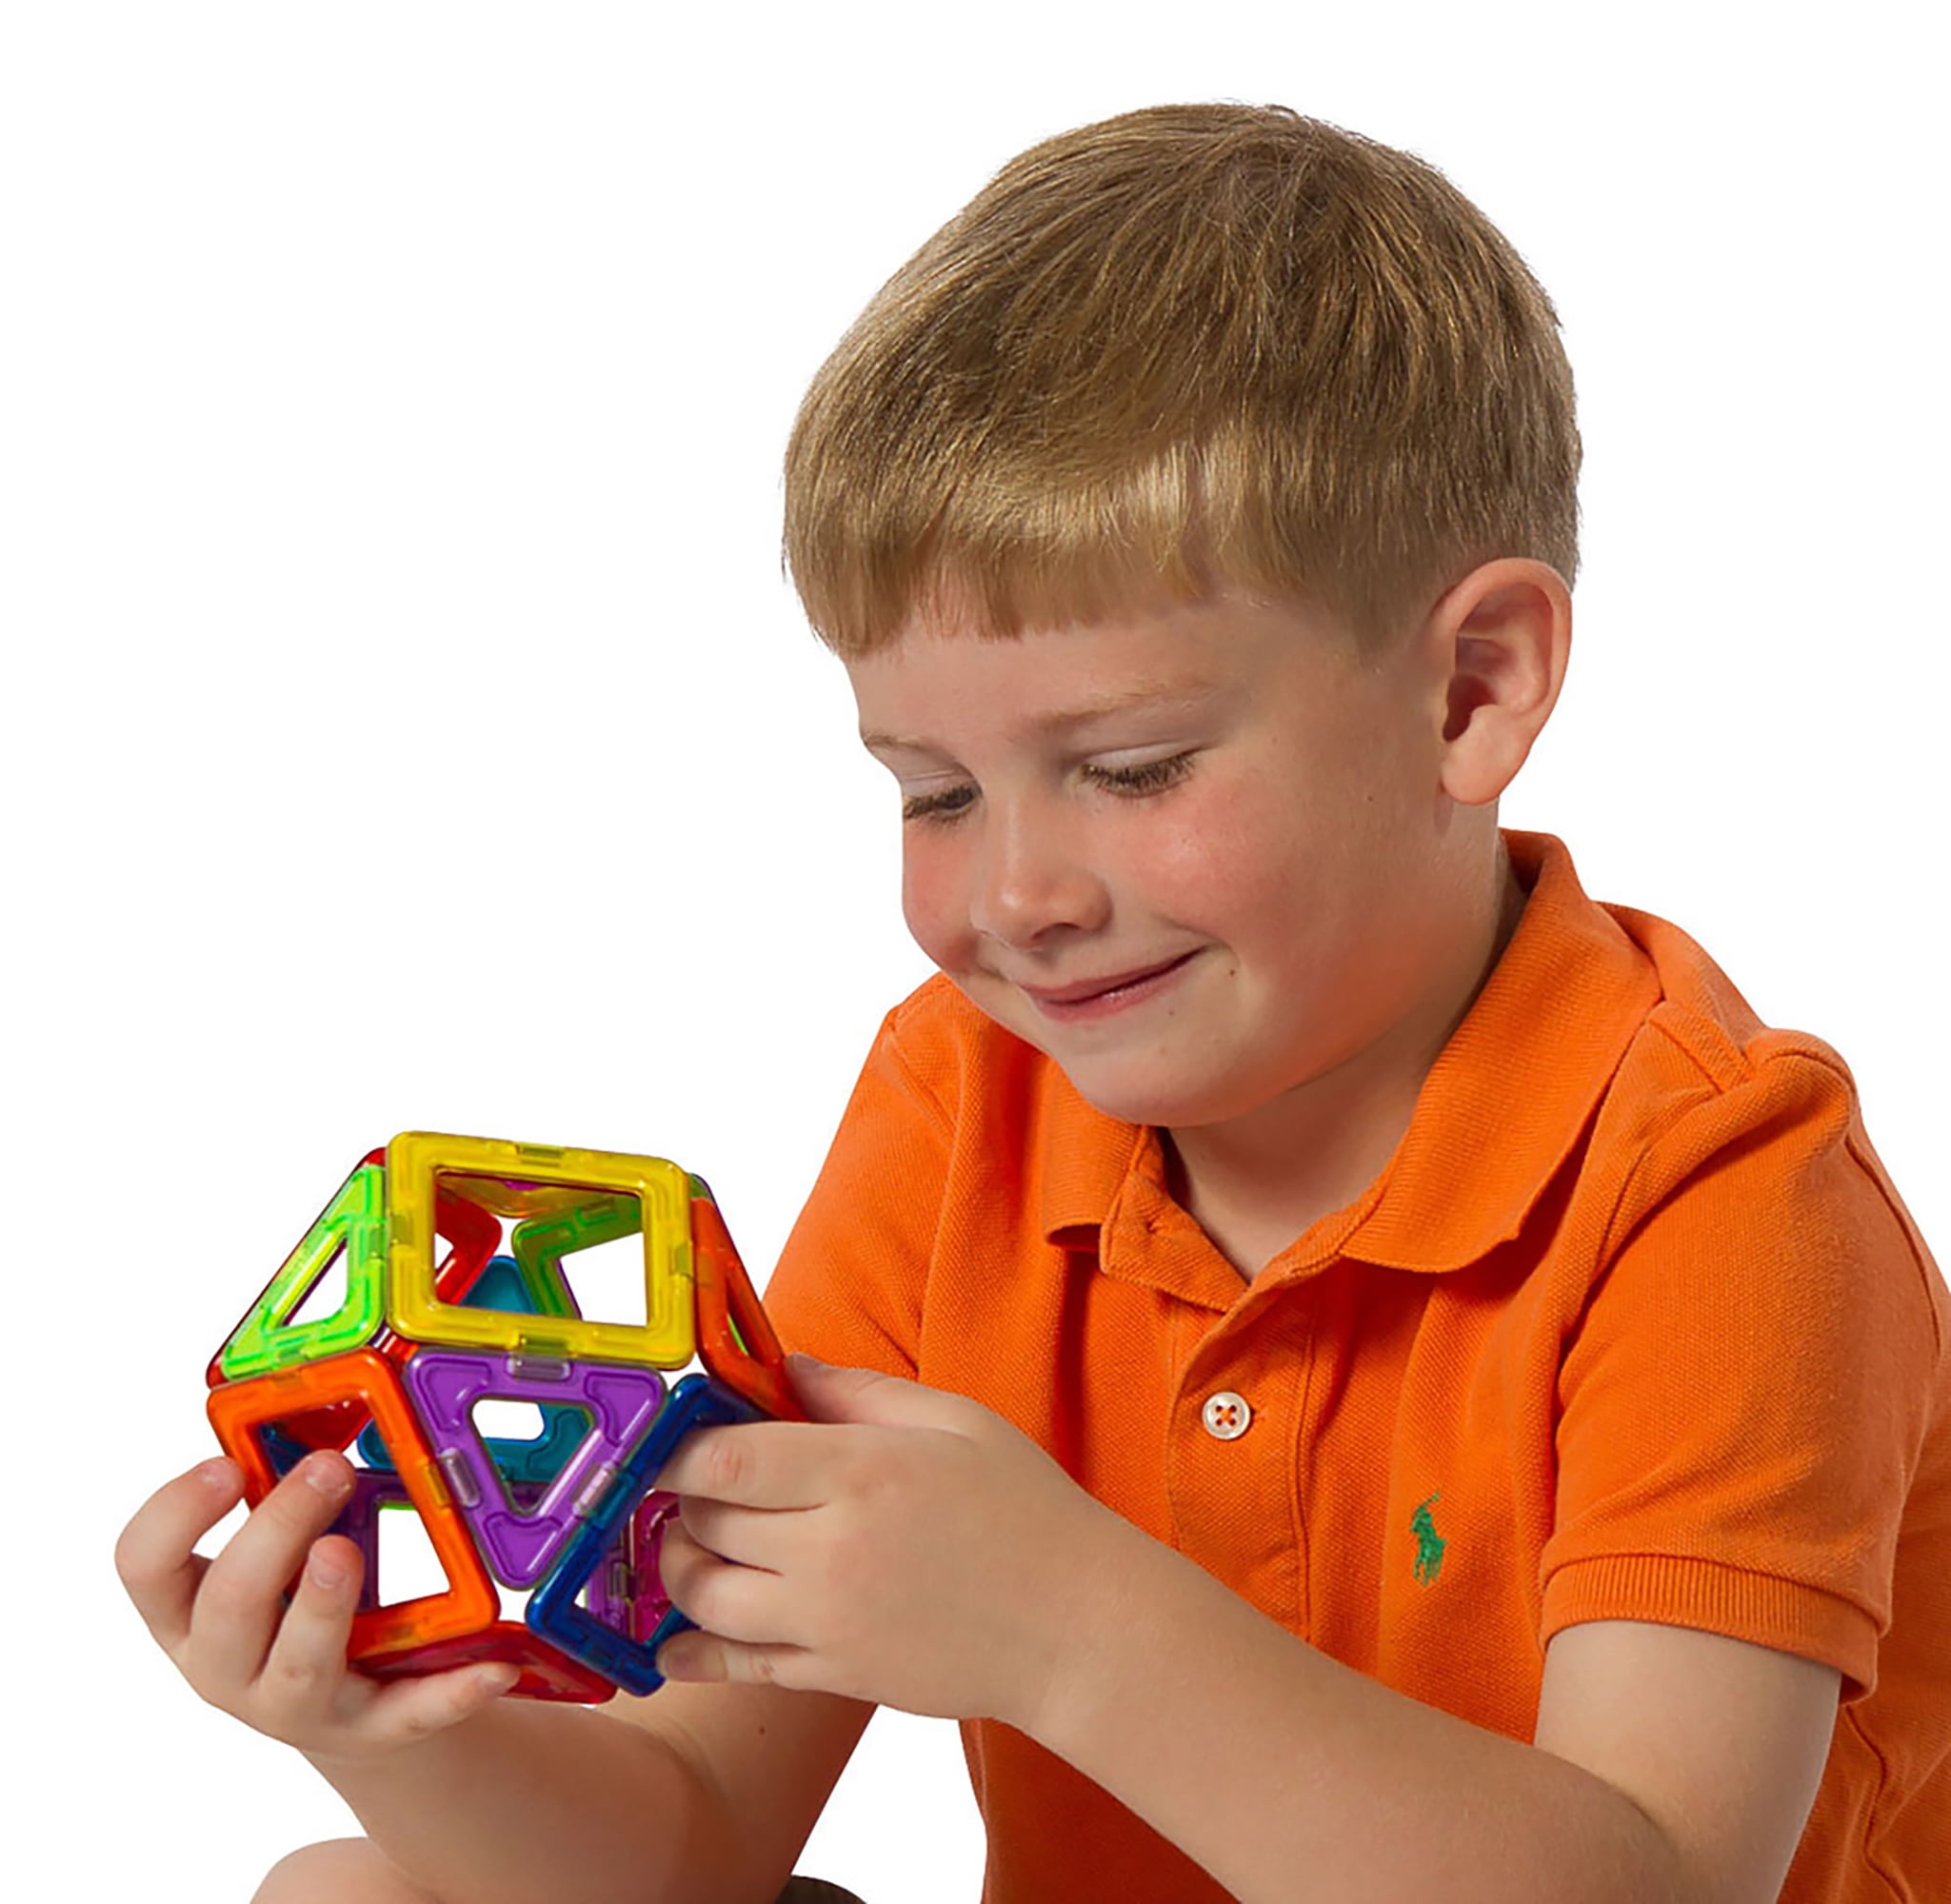 MAGFORMERS+Rainbow+Clear+Solid+Set+14pcs+Basic+Magnetic+Building+Blocks for  sale online